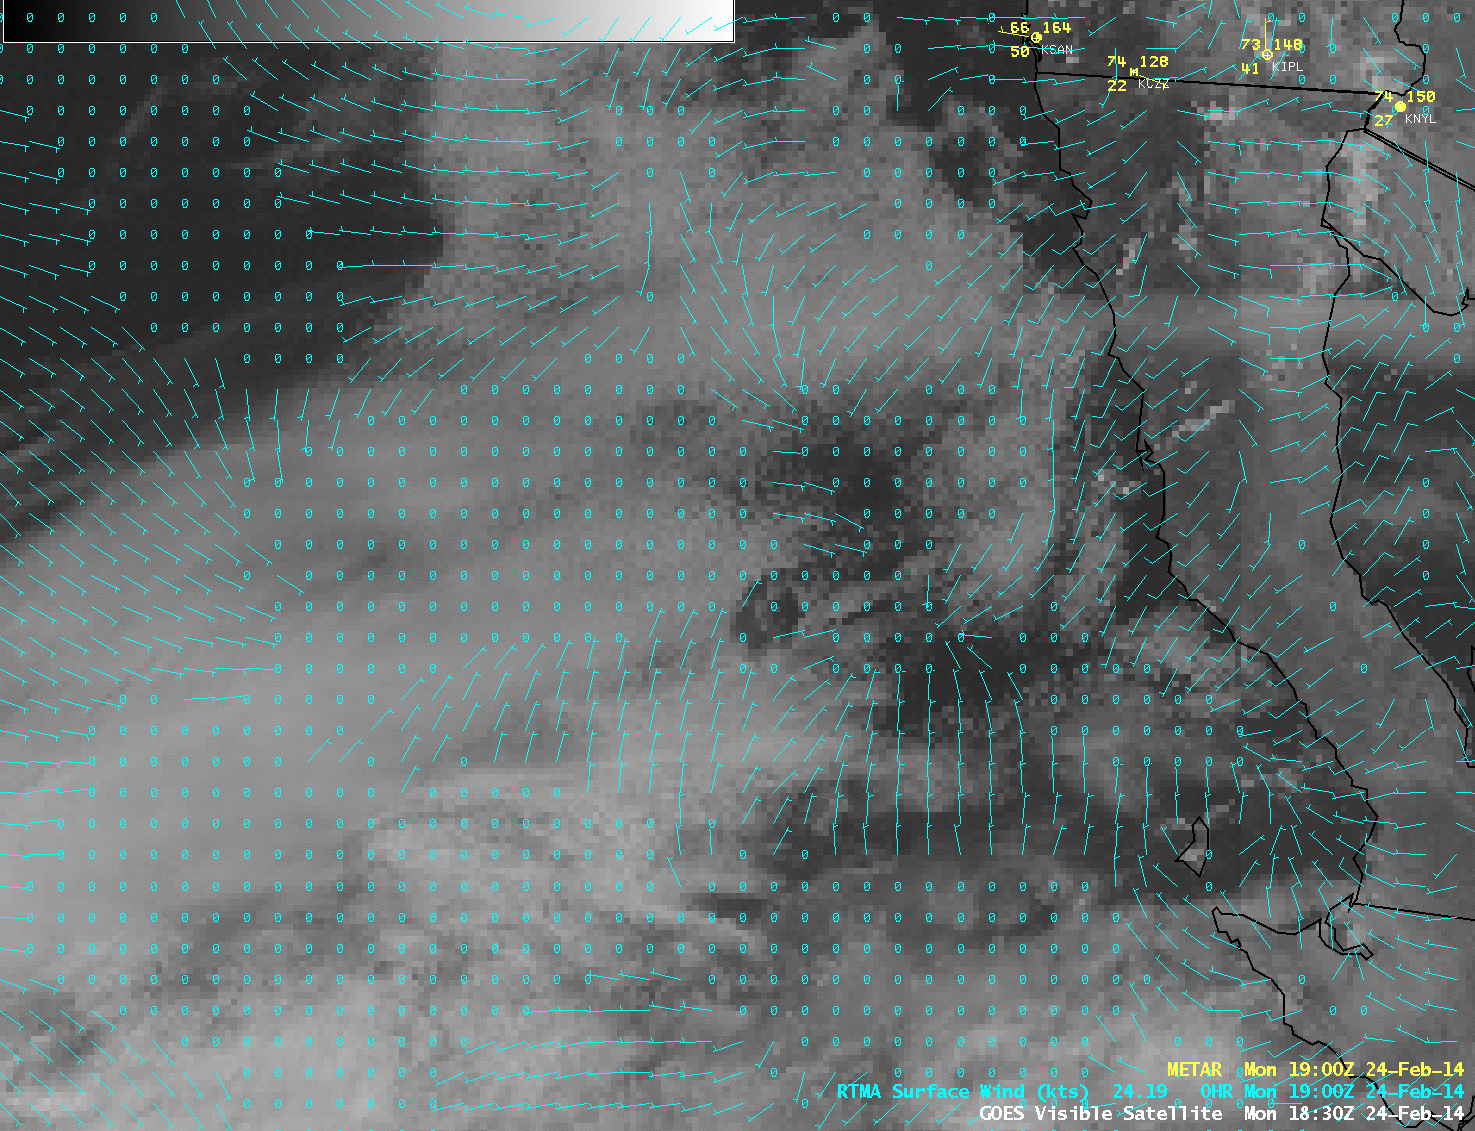 GOES-15 0.63 Âµm visible images with RTMA surface winds